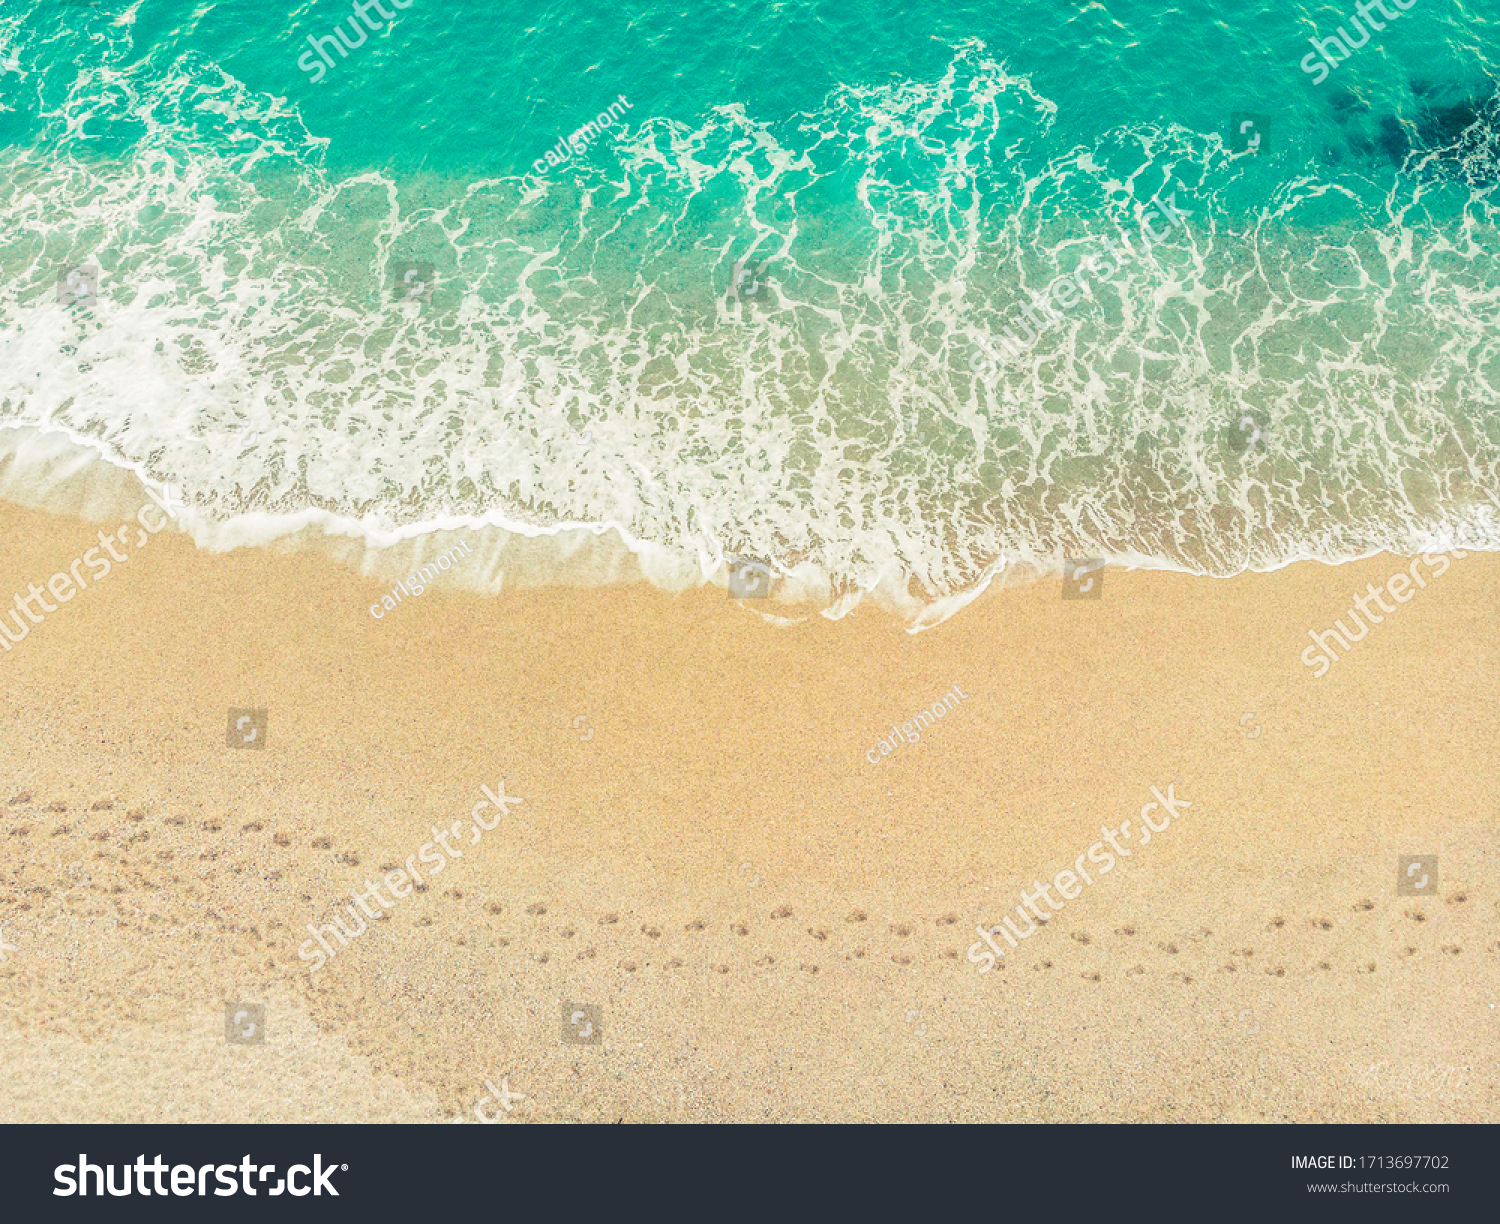 Top view of a beach with barefoot walk marks along #1713697702